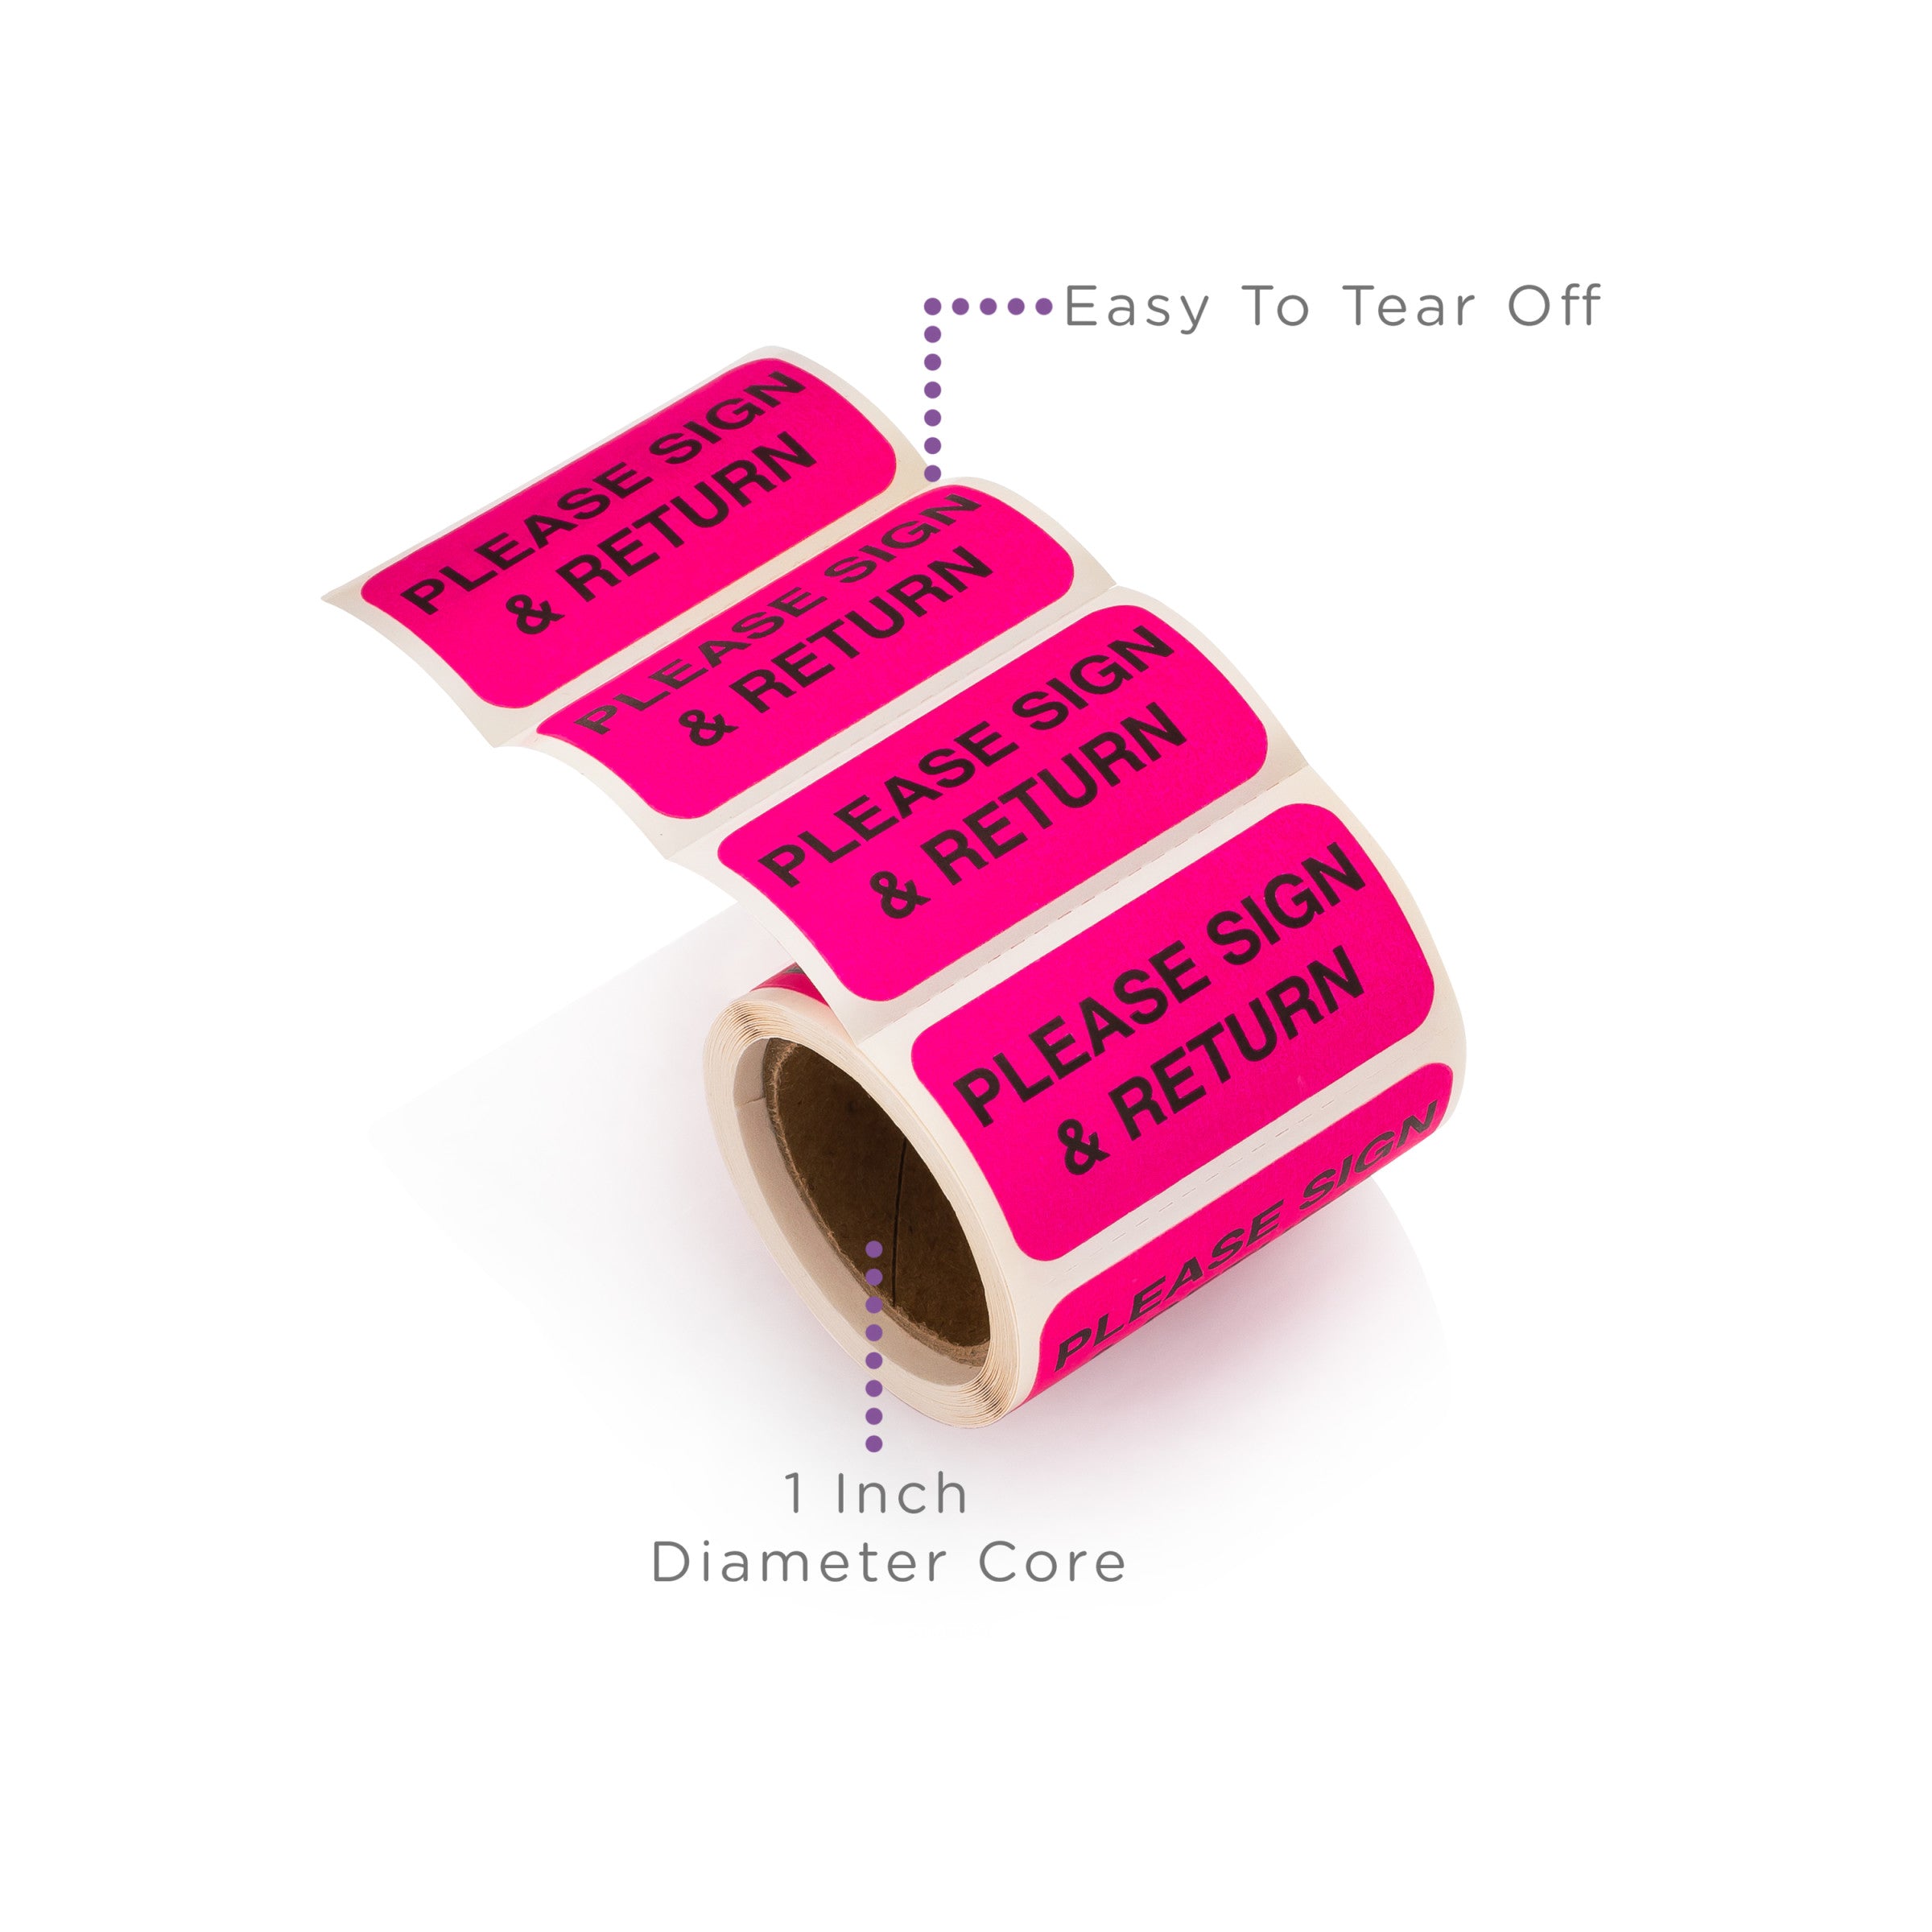 Please Sign Alert and Instruction Labels, Pink, W1.5" x H.75" (Roll of 100)